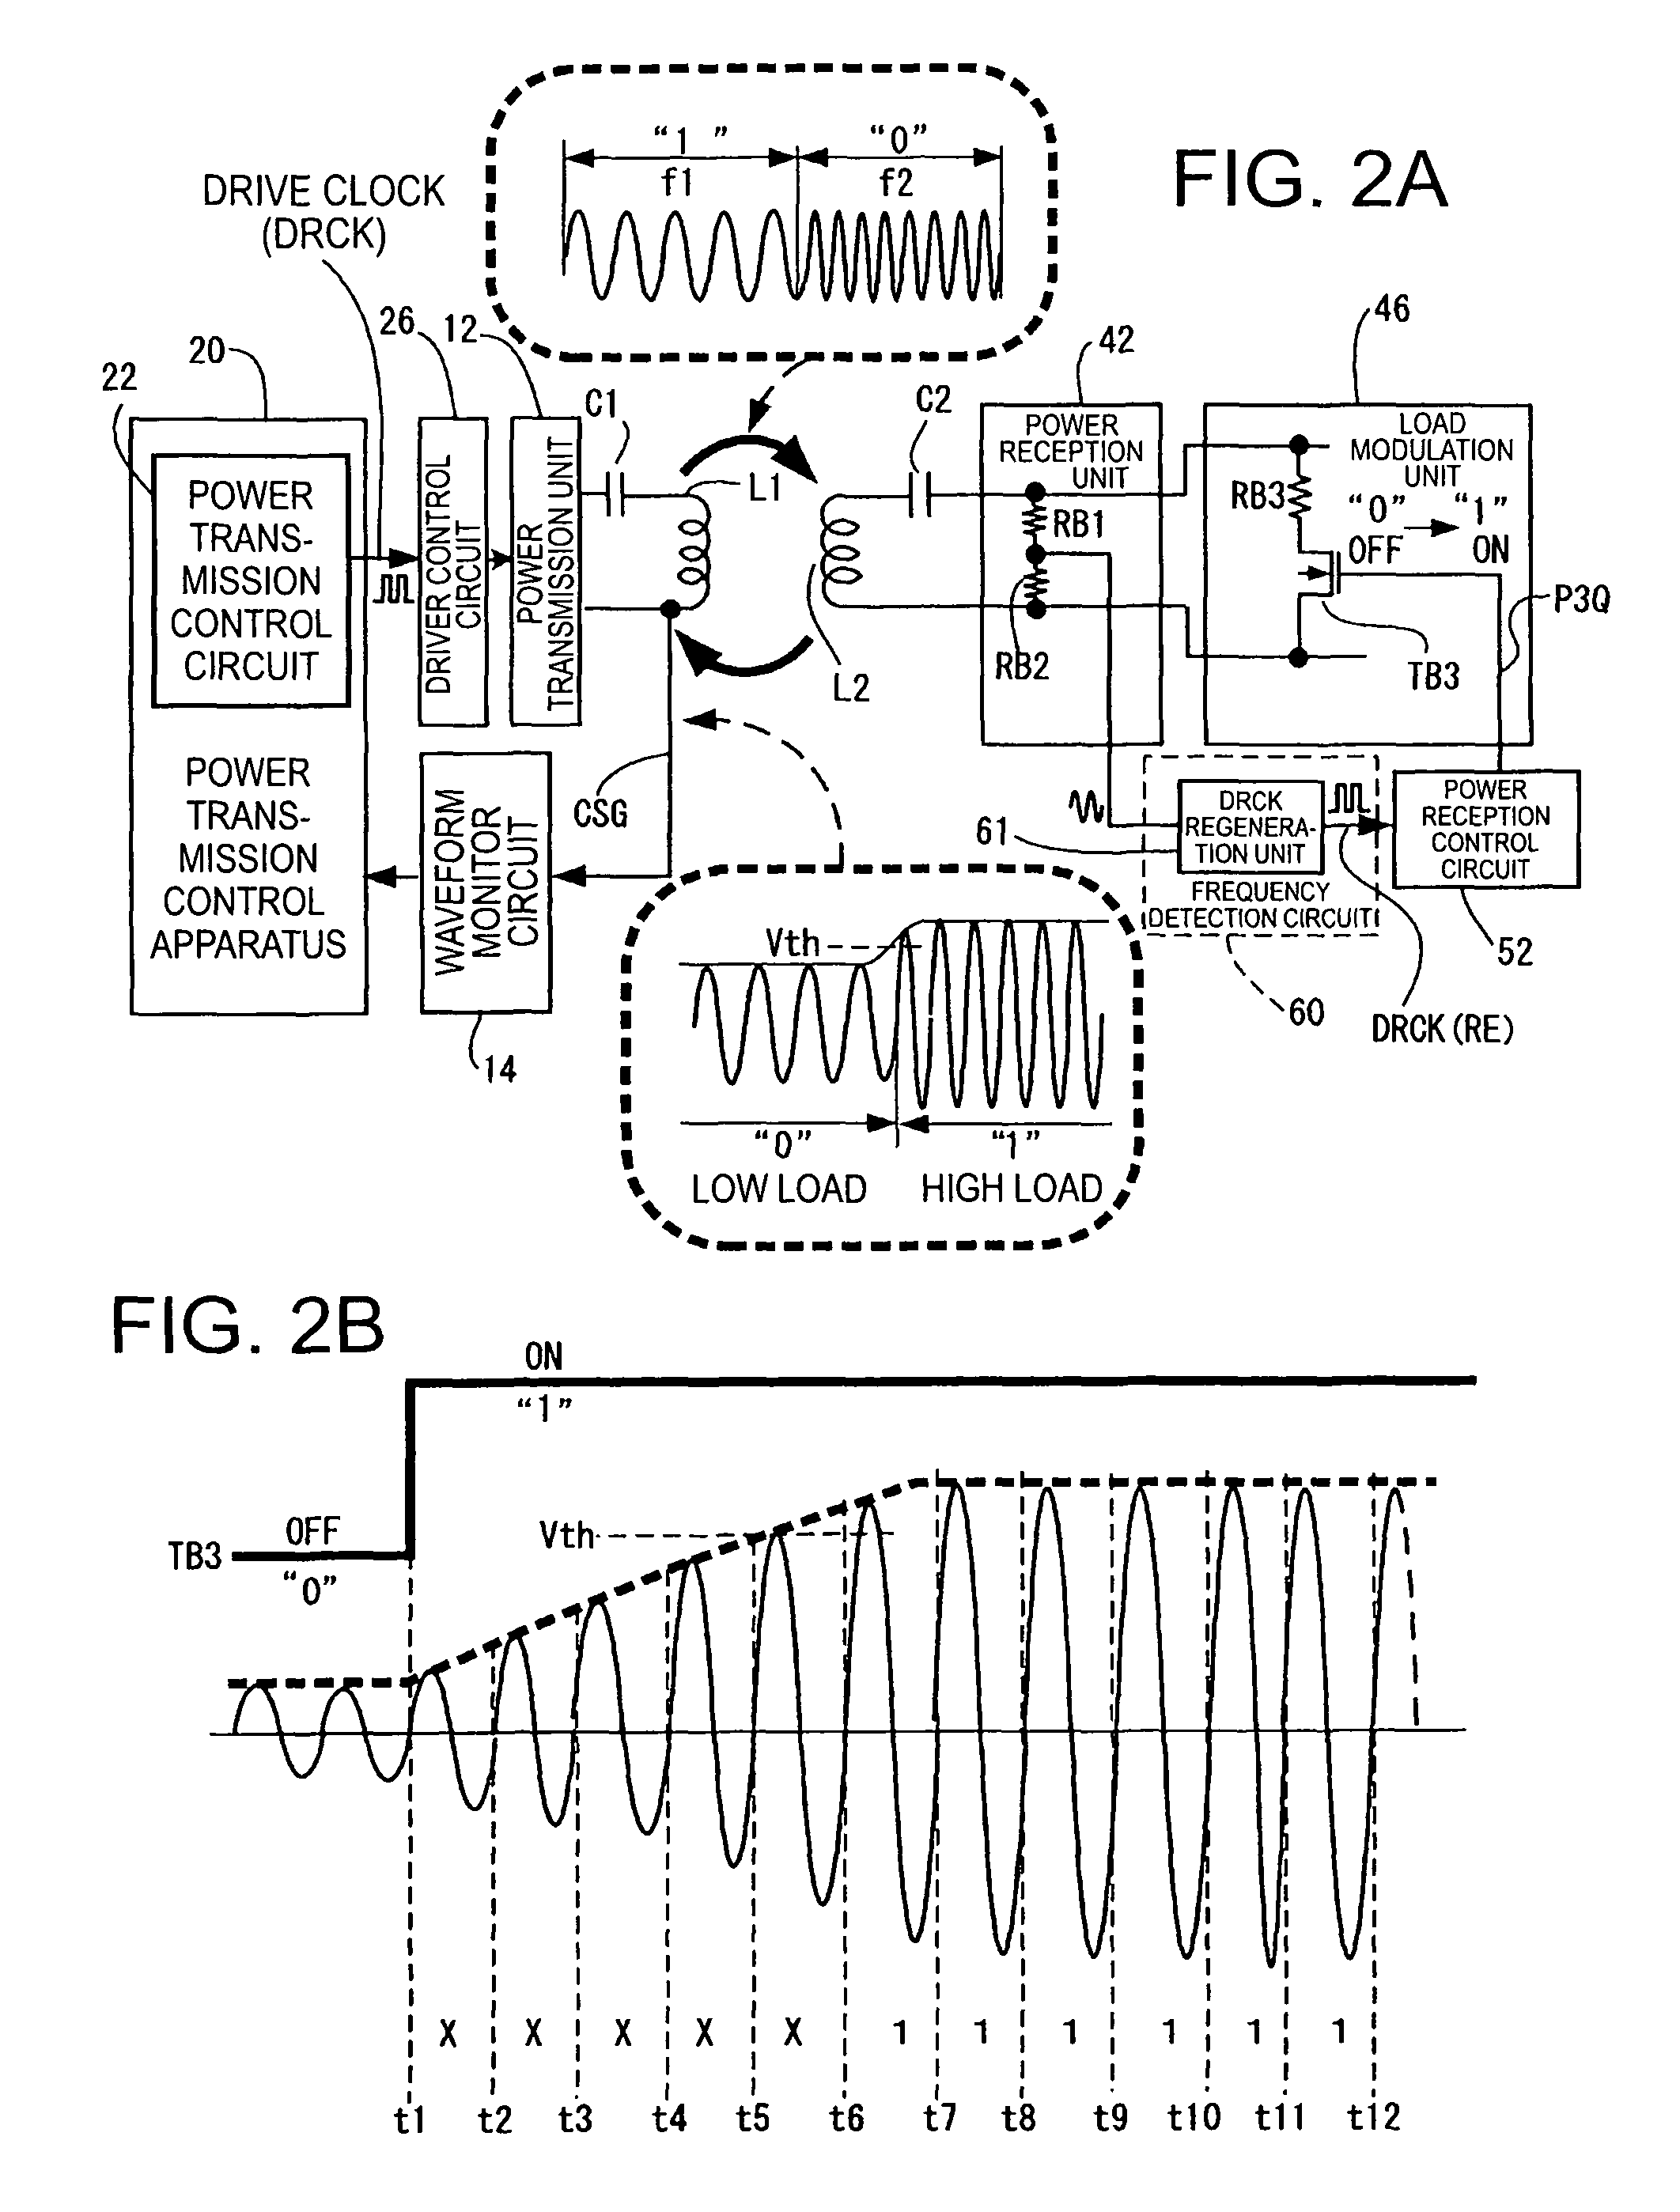 Power transmission control apparatus, power transmission apparatus, contactless power transmission system, and data determination method